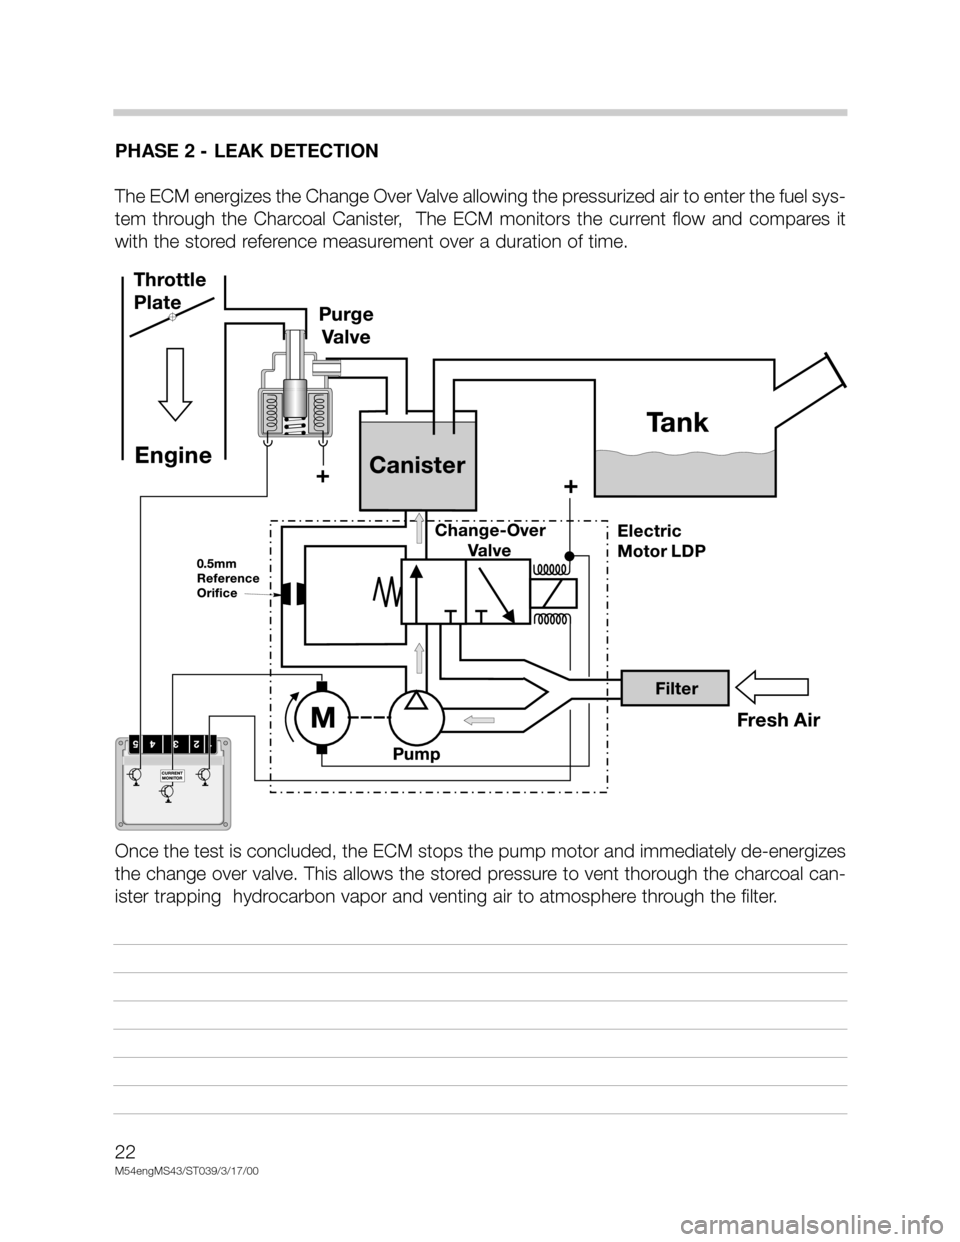 BMW X5 2001 E53 M54 Engine Owners Manual 22
M54engMS43/ST039/3/17/00
PHASE 2 - LEAK DETECTION
The ECM energizes the Change Over Valve allowing the pressurized air to enter the fuel sys-
tem  through  the  Charcoal  Canister,    The  ECM  mon